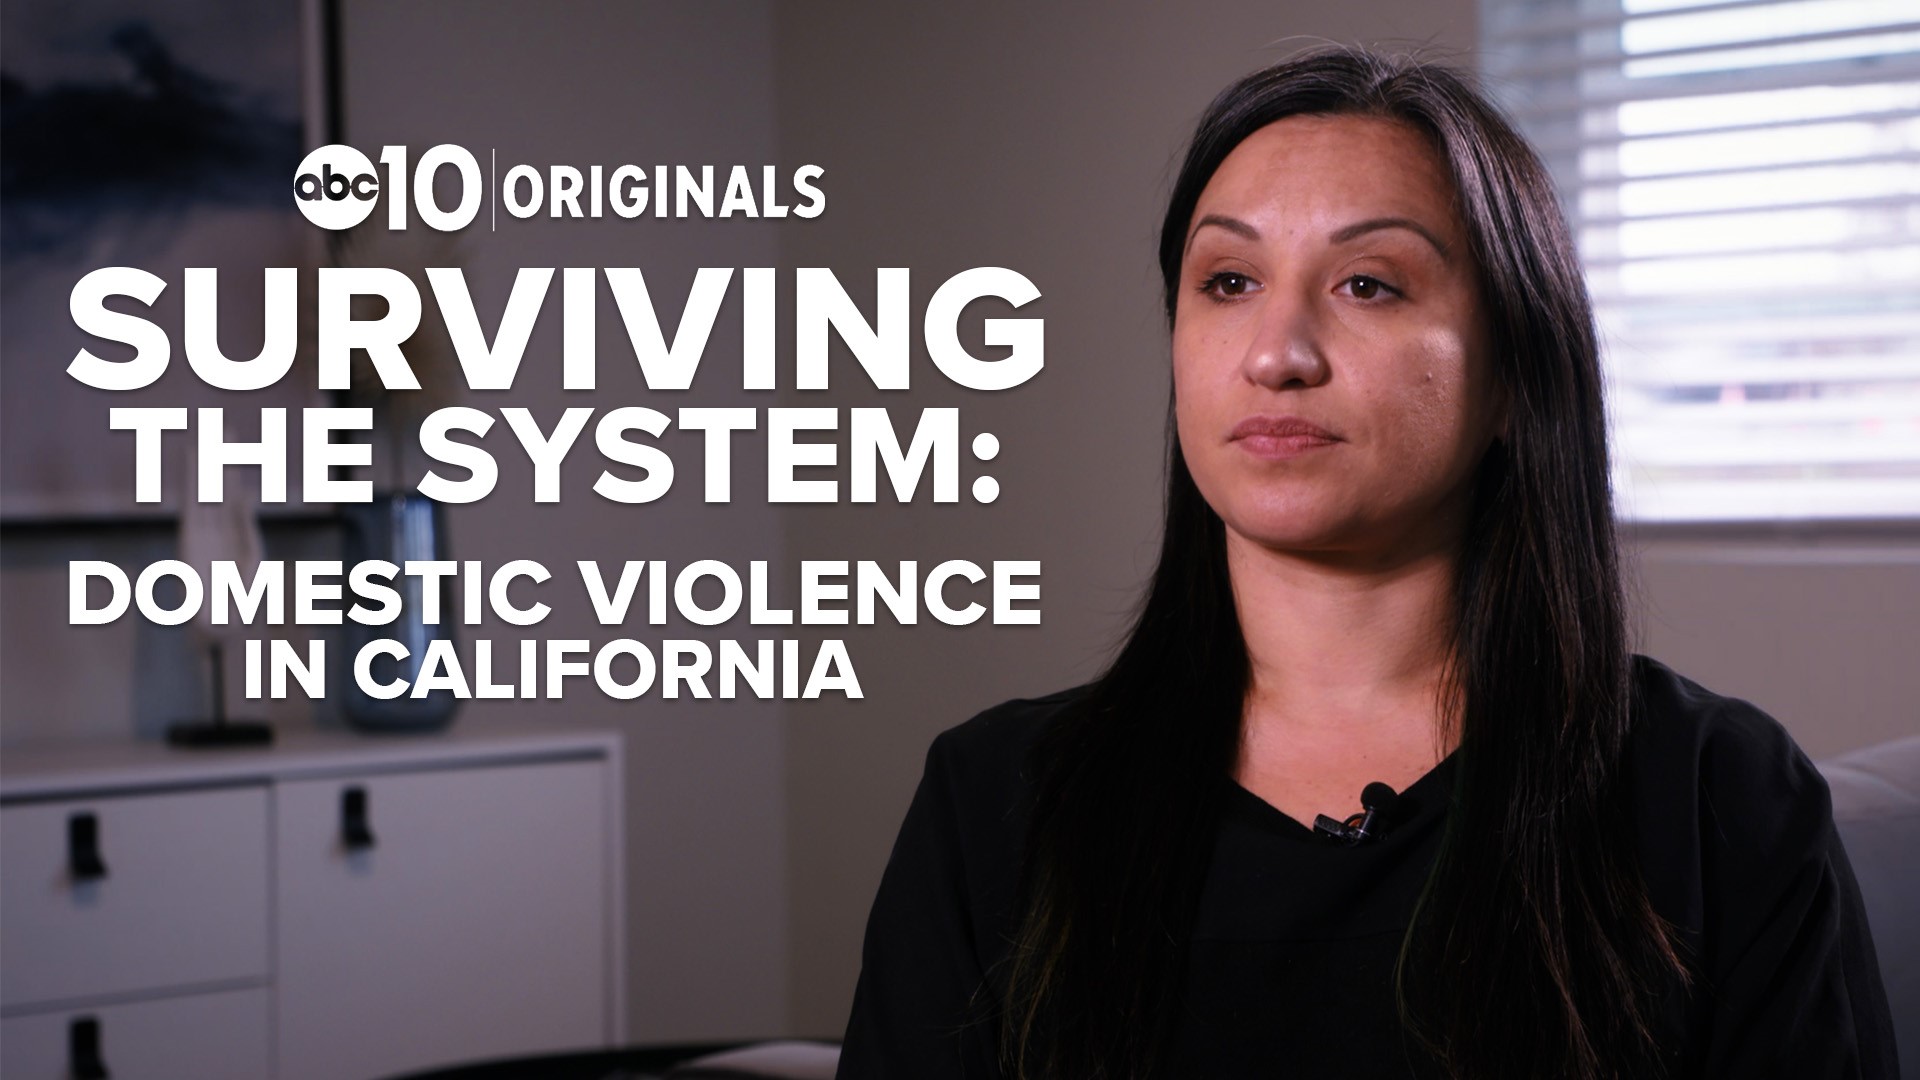 ABC10's investigation into how domestic violence cases are handled in California found a system of errors that isn't holding offenders accountable.